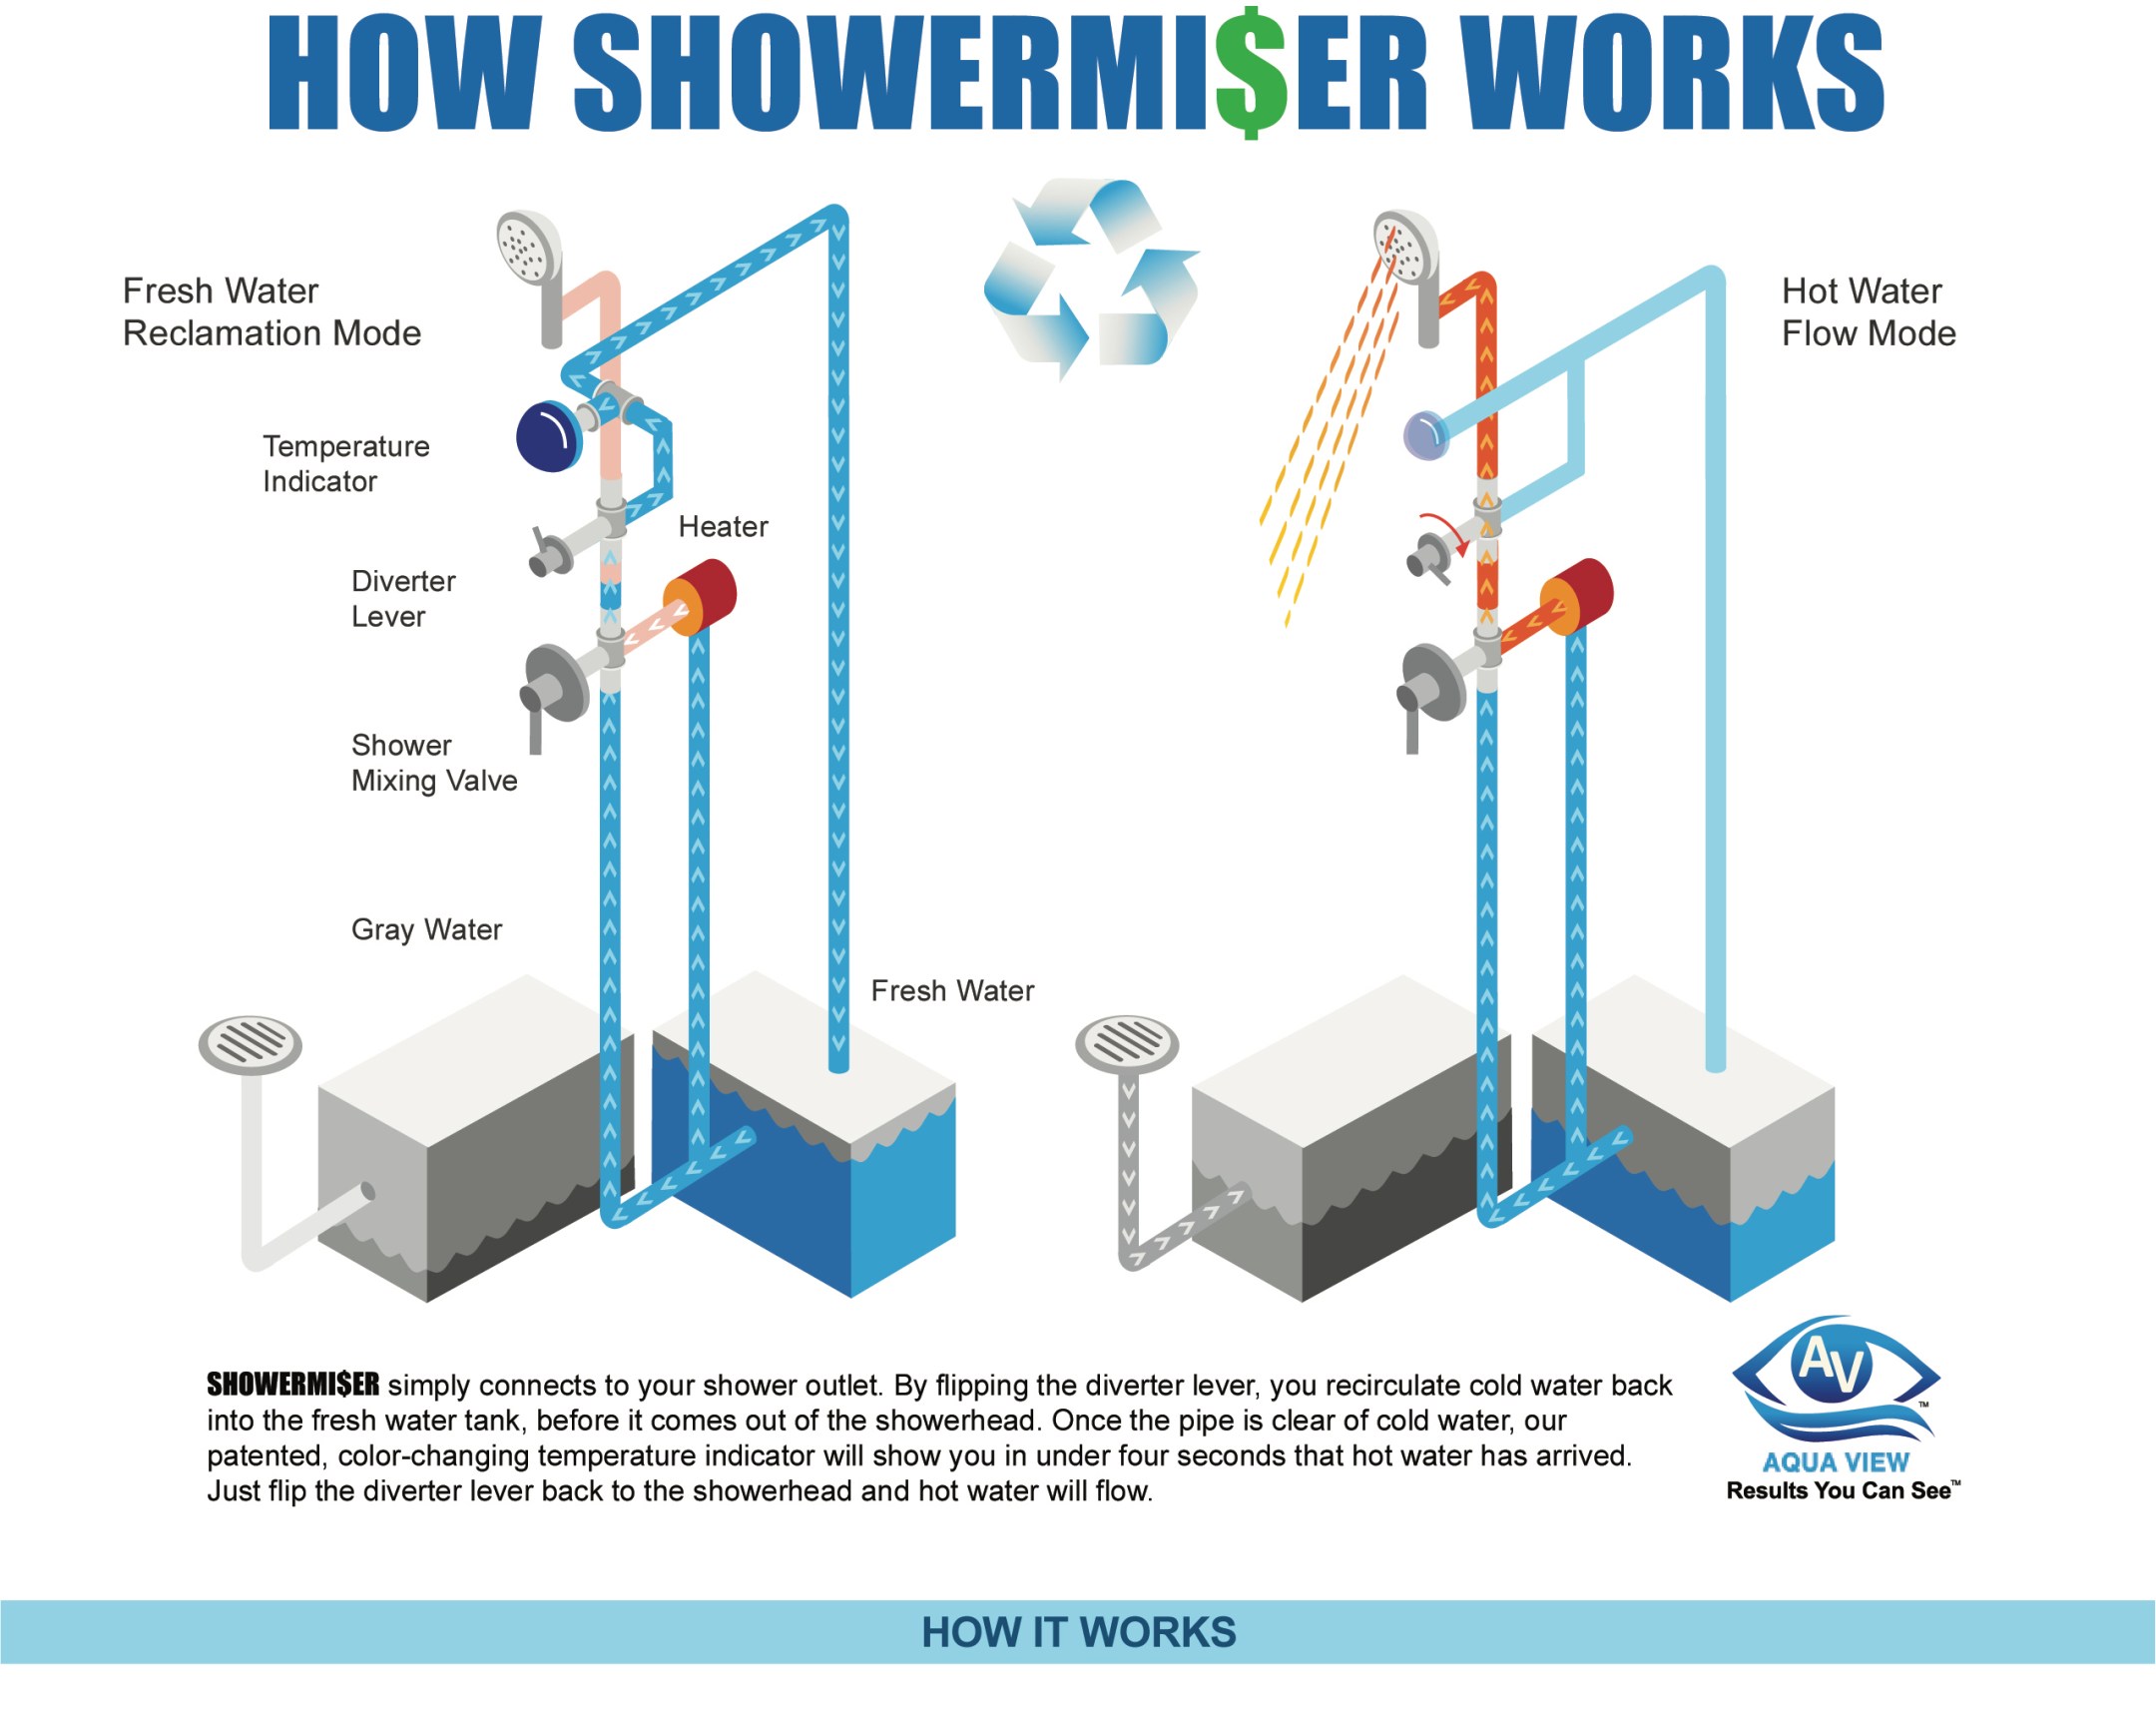 An infographic showing how the Showermiser works